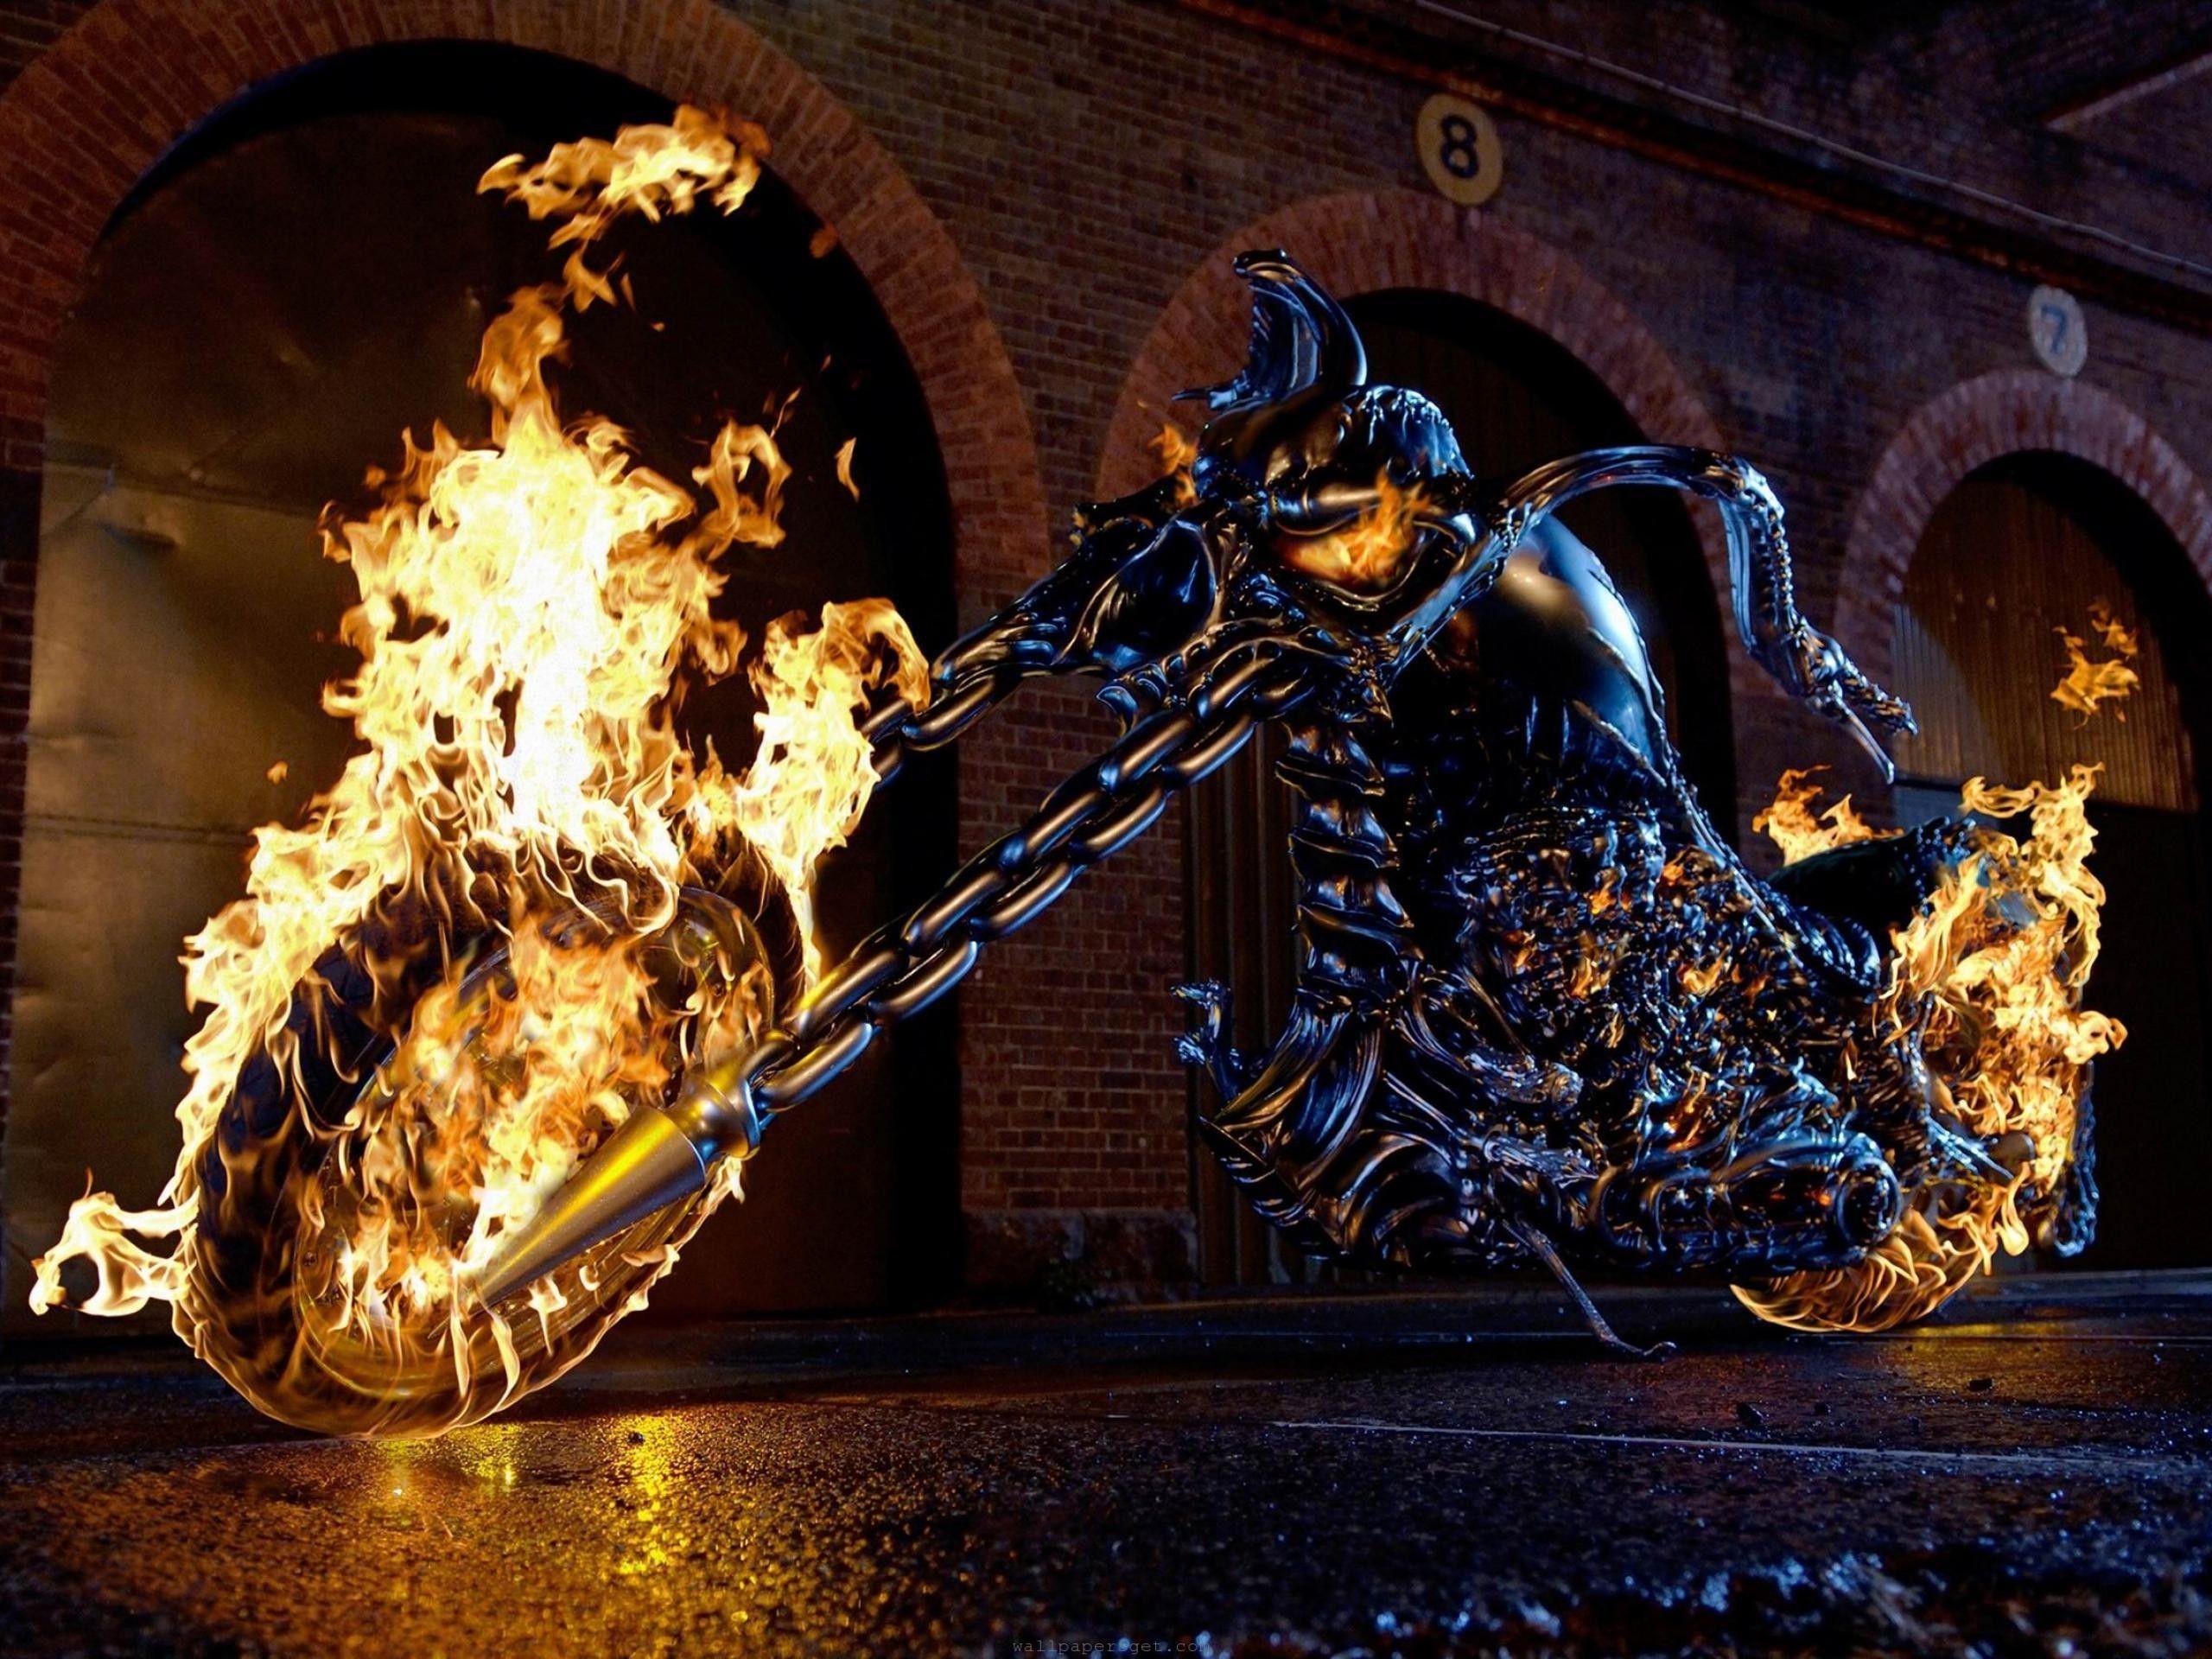 Ghost Rider Fire Bike Wallpapers - Wallpaper Cave